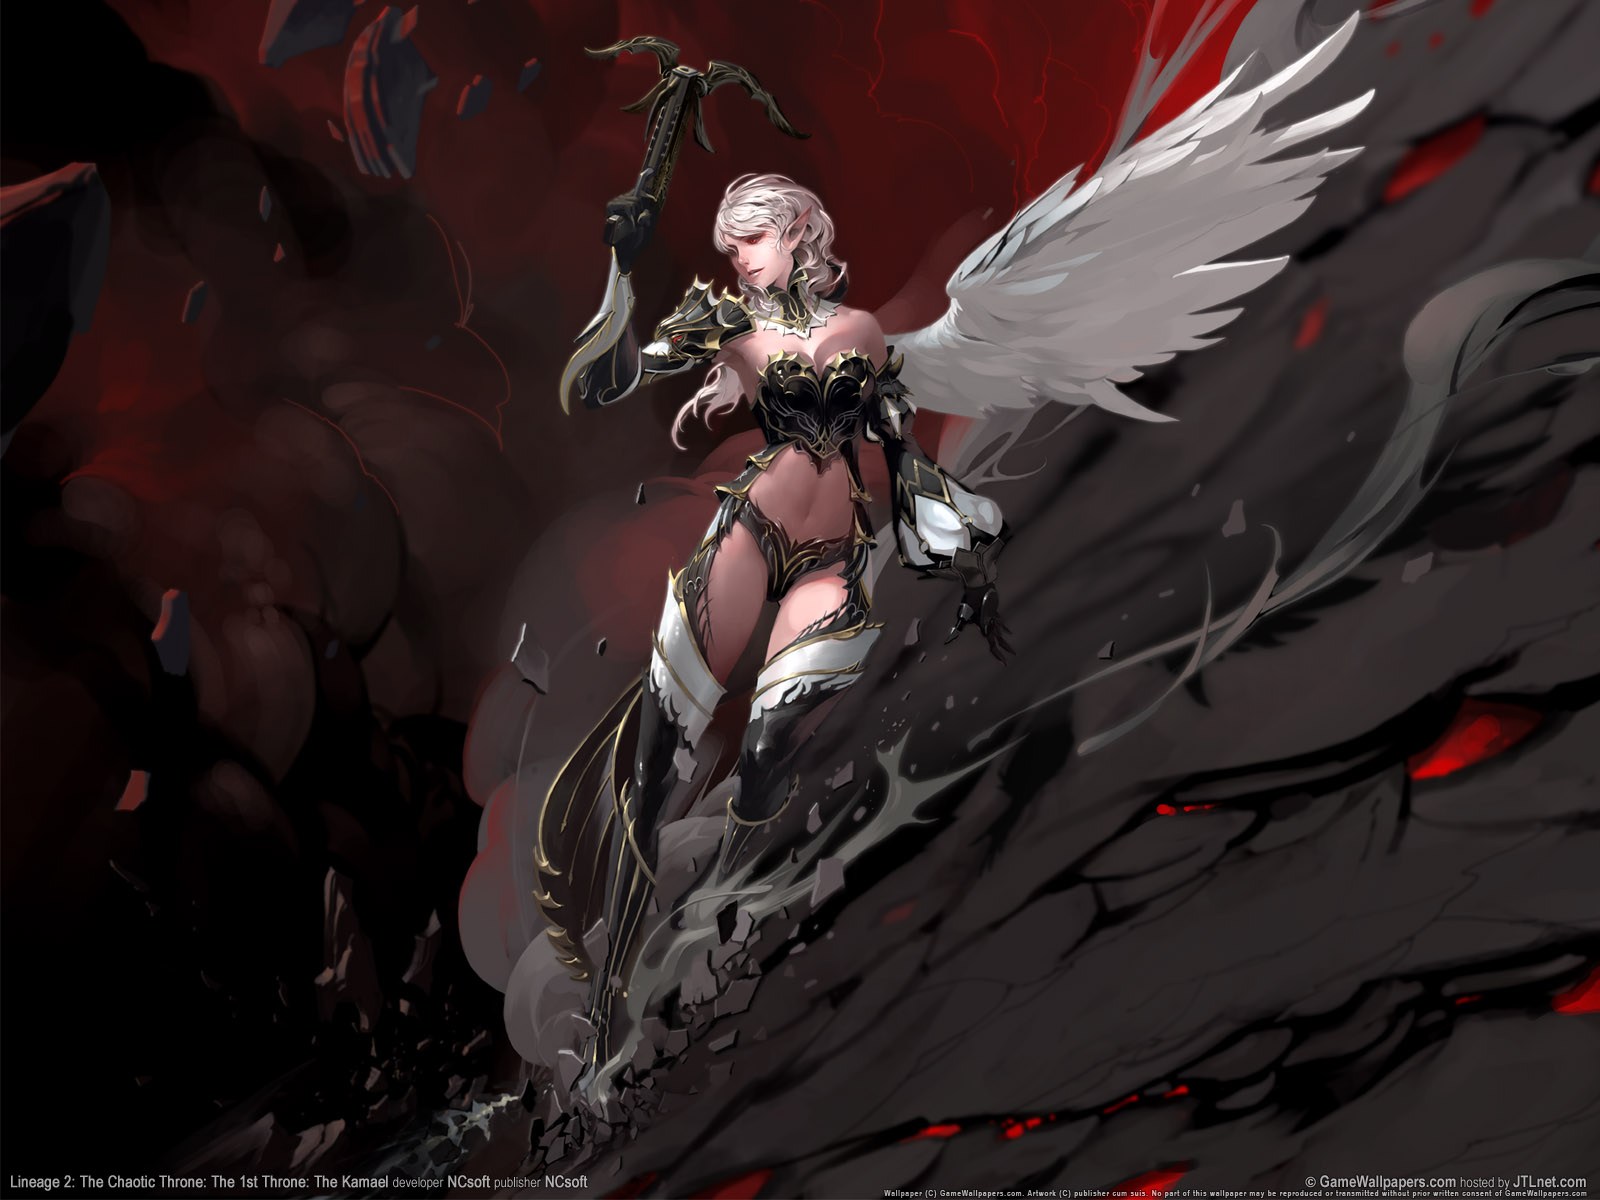 Download full size Lineage 2 The Chaotic Throne wallpaper / Games / 1600x1200